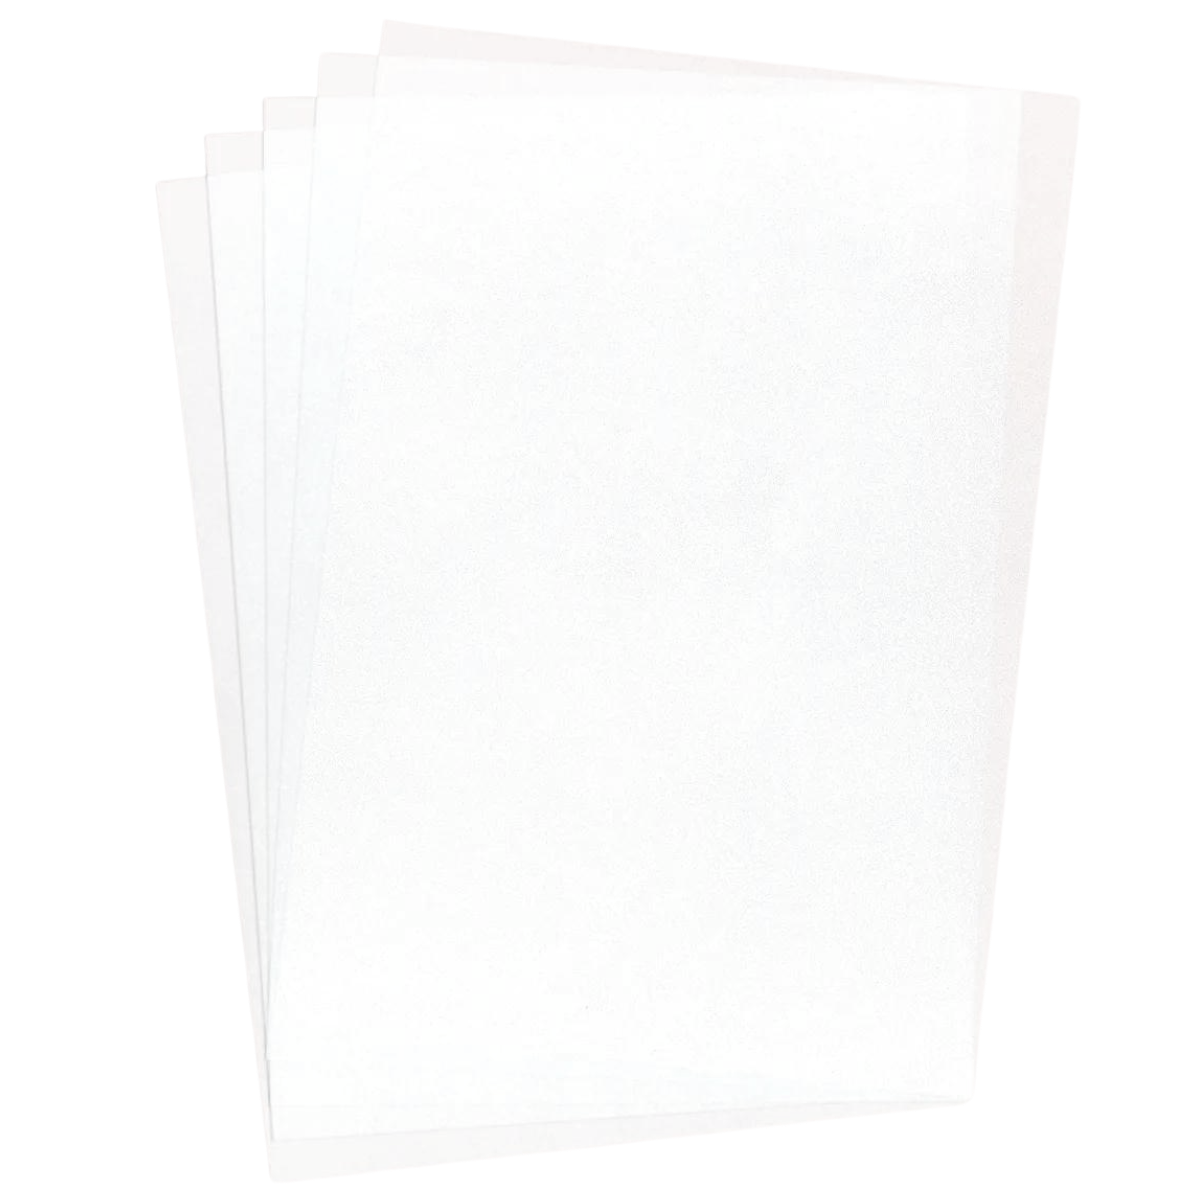 paper2eat Wafer Paper Standard - 0.30 mm thick - 100 sheets for $23.99 